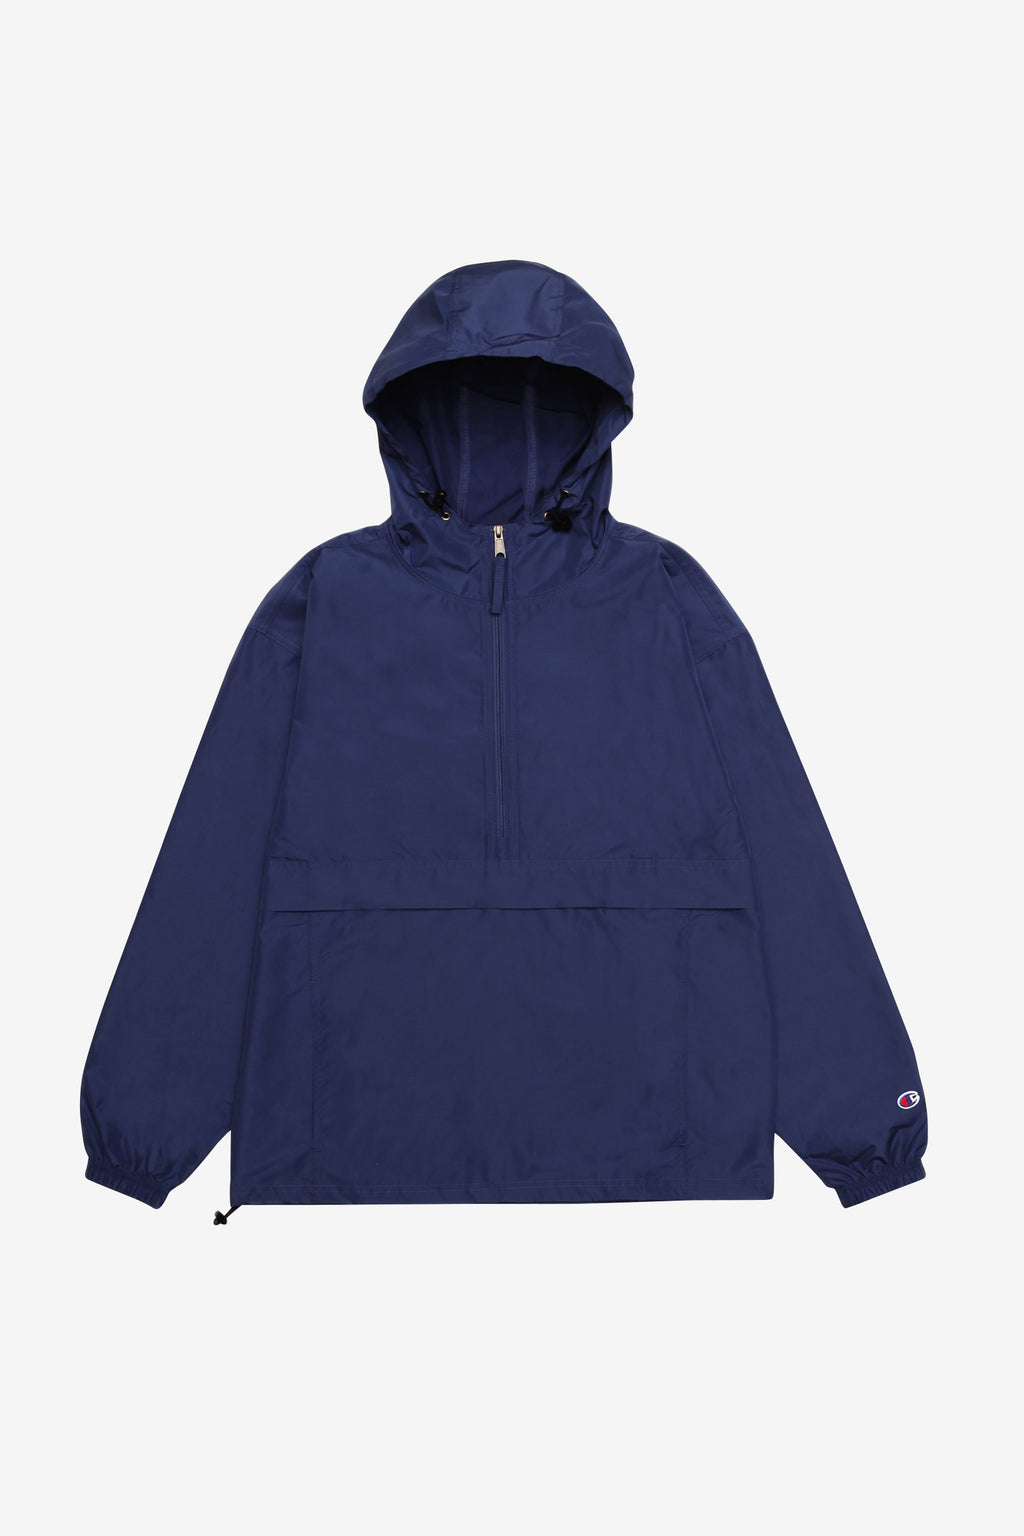 Champion - Packable Hooded Anorak Jacket - Navy | Blacksmith Store